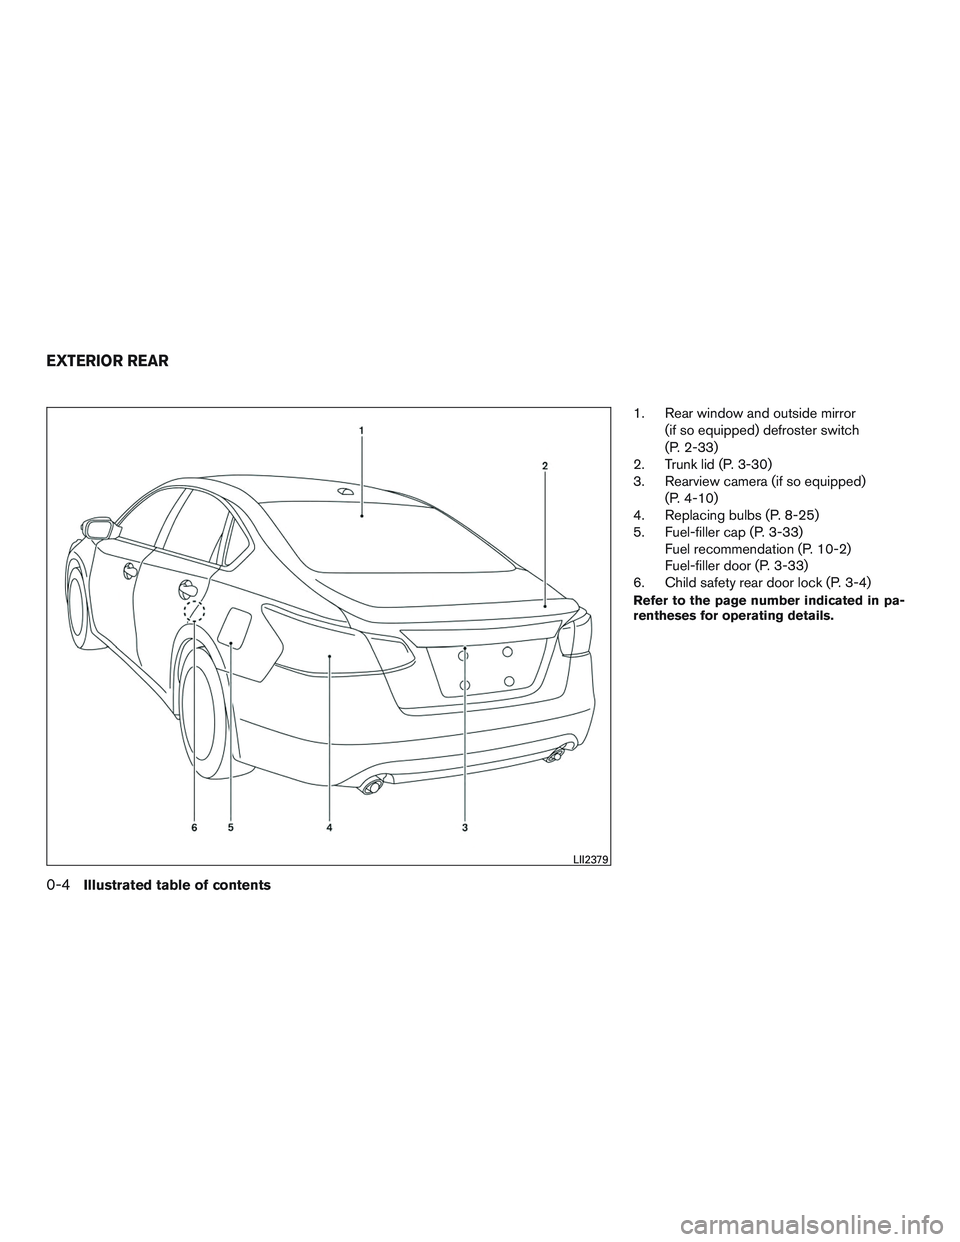 NISSAN ALTIMA SEDAN 2017  Owners Manual 1. Rear window and outside mirror(if so equipped) defroster switch
(P. 2-33)
2. Trunk lid (P. 3-30)
3. Rearview camera (if so equipped)
(P. 4-10)
4. Replacing bulbs (P. 8-25)
5. Fuel-filler cap (P. 3-